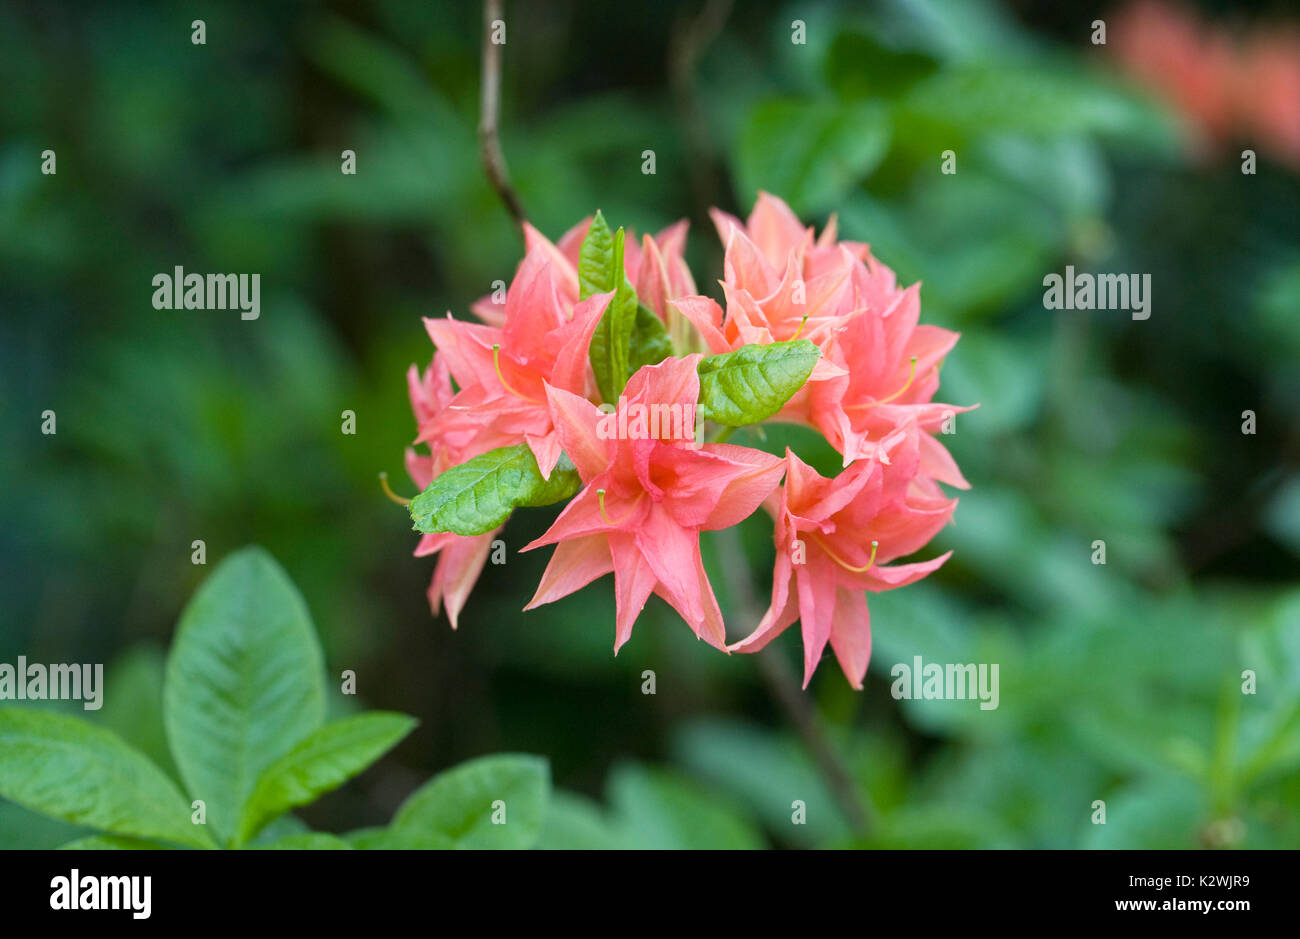 Rhododendron Norma flowers. Stock Photo